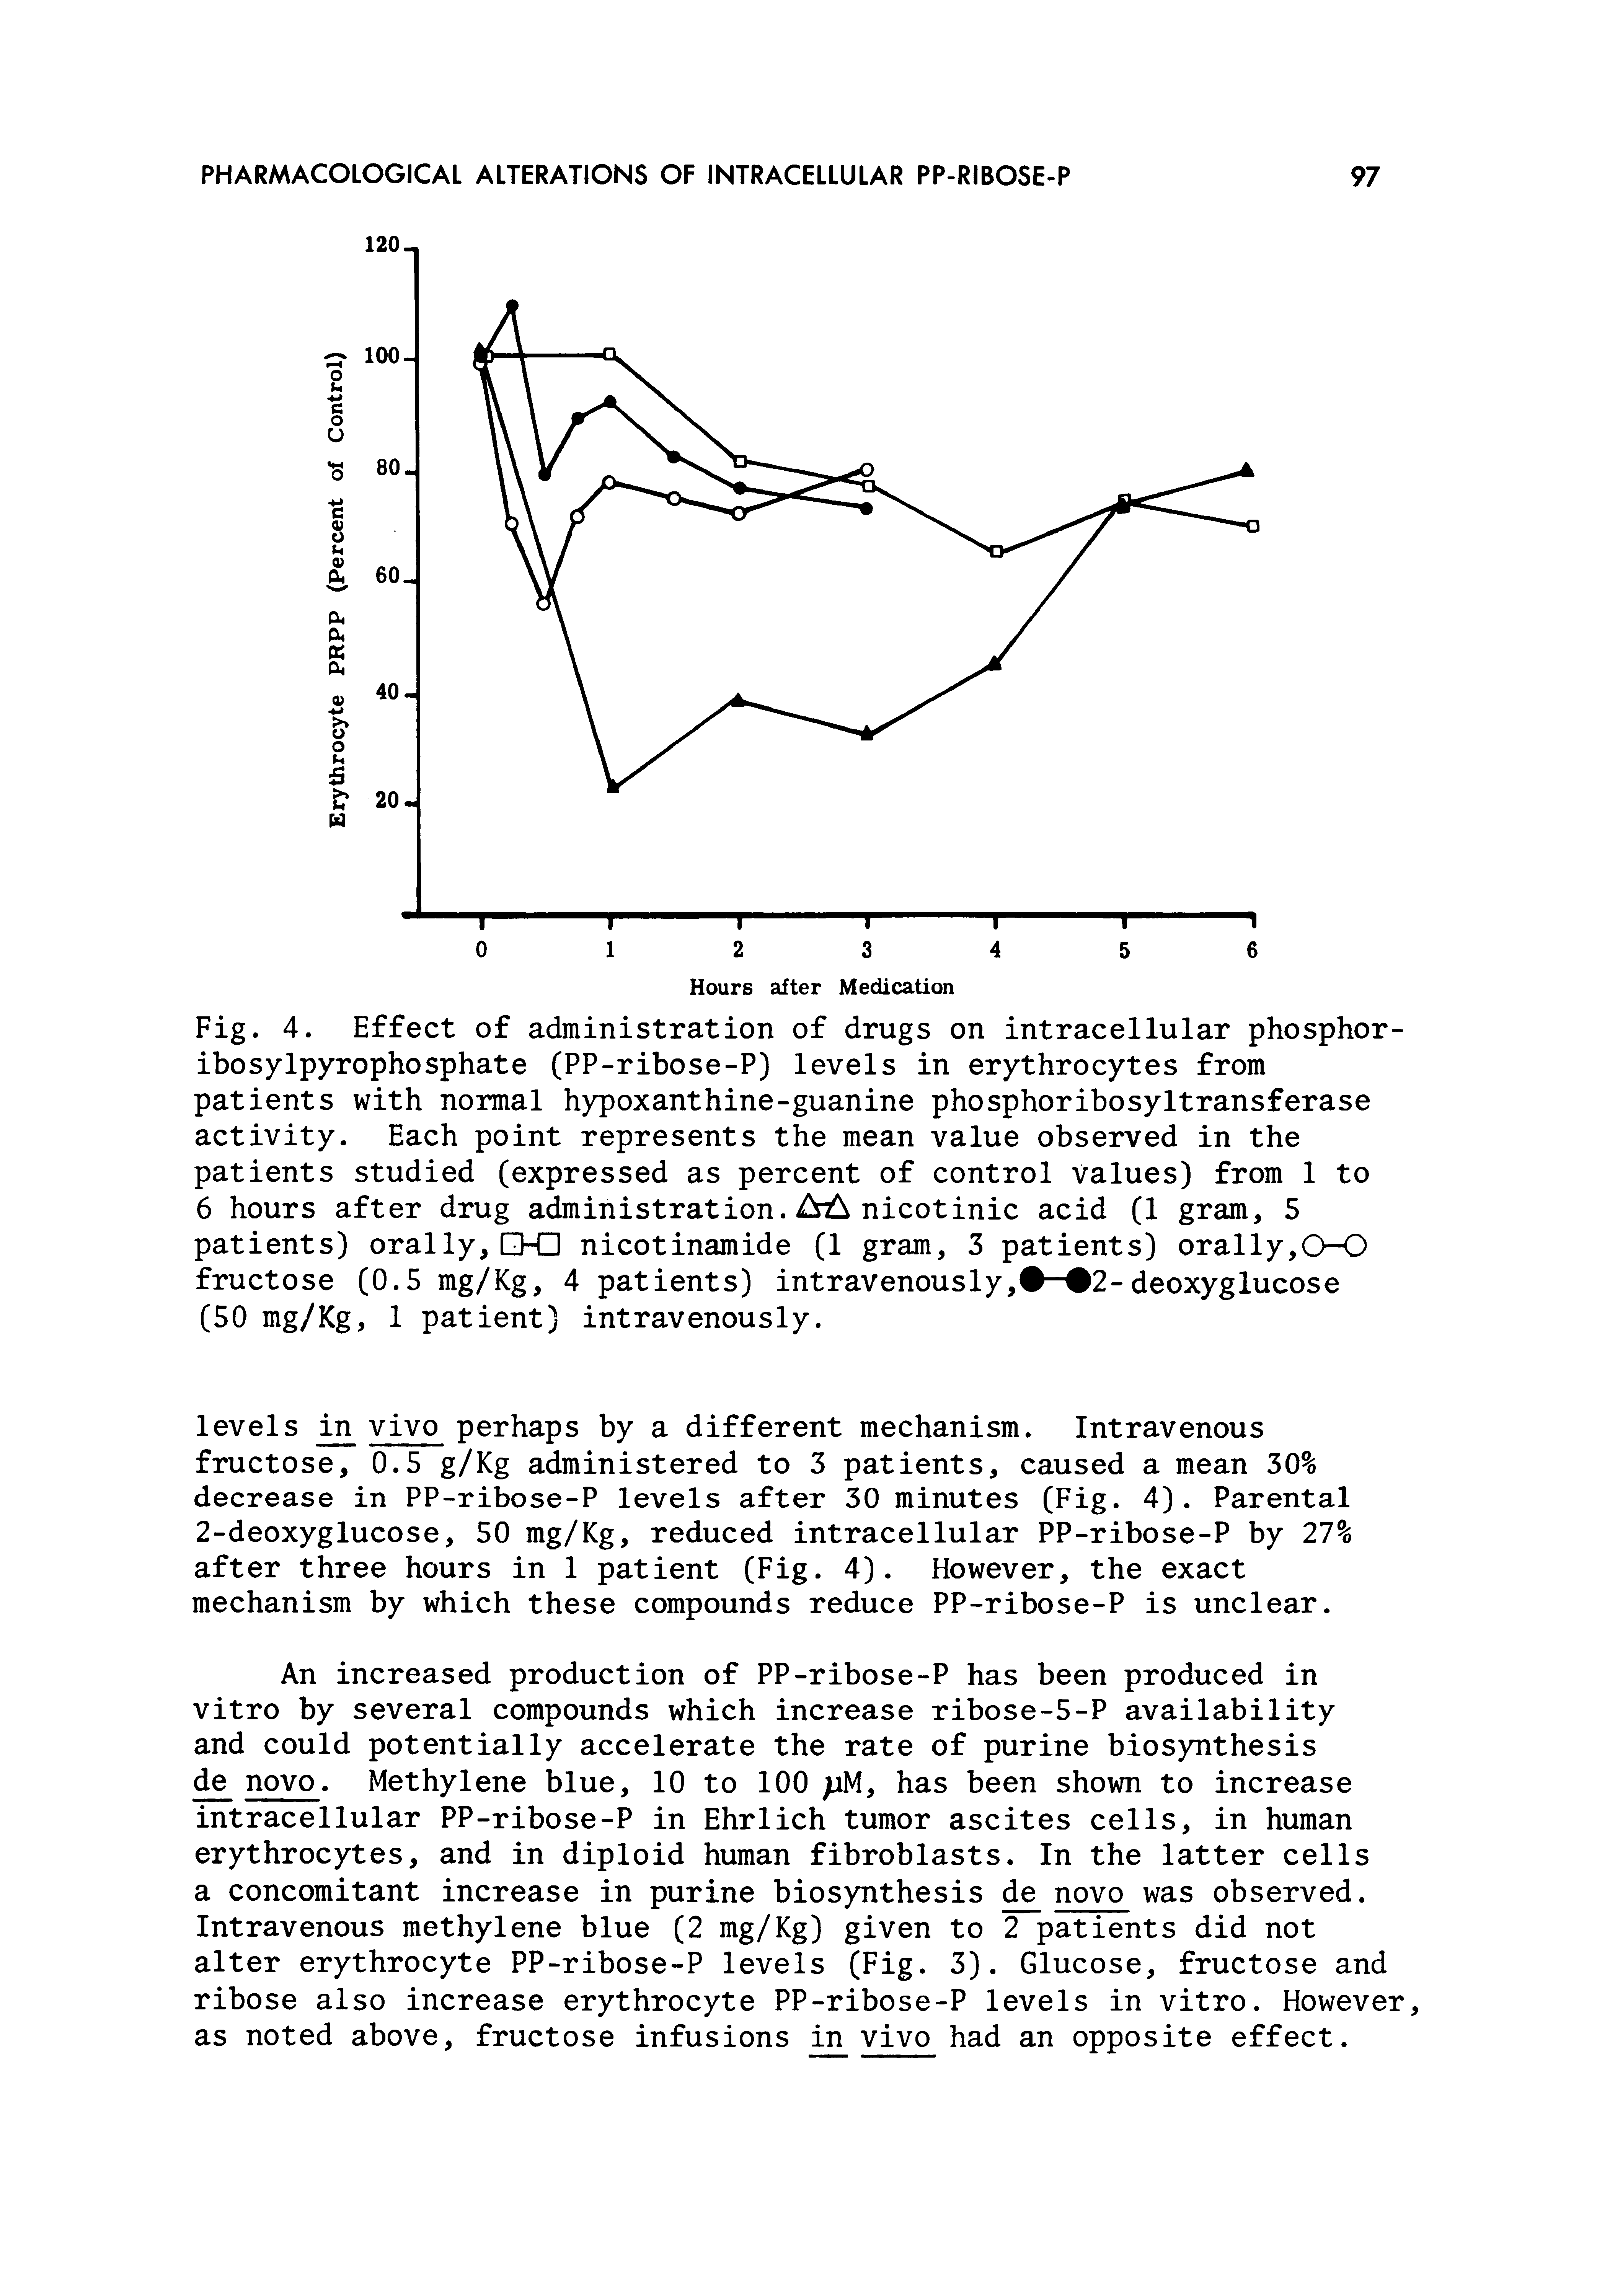 Fig. 4. Effect of administration of drugs on intracellular phosphor-ibosylpyrophosphate (PP-ribose-P) levels in erythrocytes from patients with normal hypoxanthine-guanine phosphoribosyltransferase activity. Each point represents the mean value observed in the patients studied (expressed as percent of control Values) from 1 to 6 hours after drug administration, nicotinic acid (1 gram, 5 patients) orally, GHU nicotinamide (1 gram, 3 patients) orally,C>-0 fructose (0.5 mg/Kg, 4 patients) intravenously, — 2-deoxyglucose (50 mg/Kg, 1 patient) intravenously.